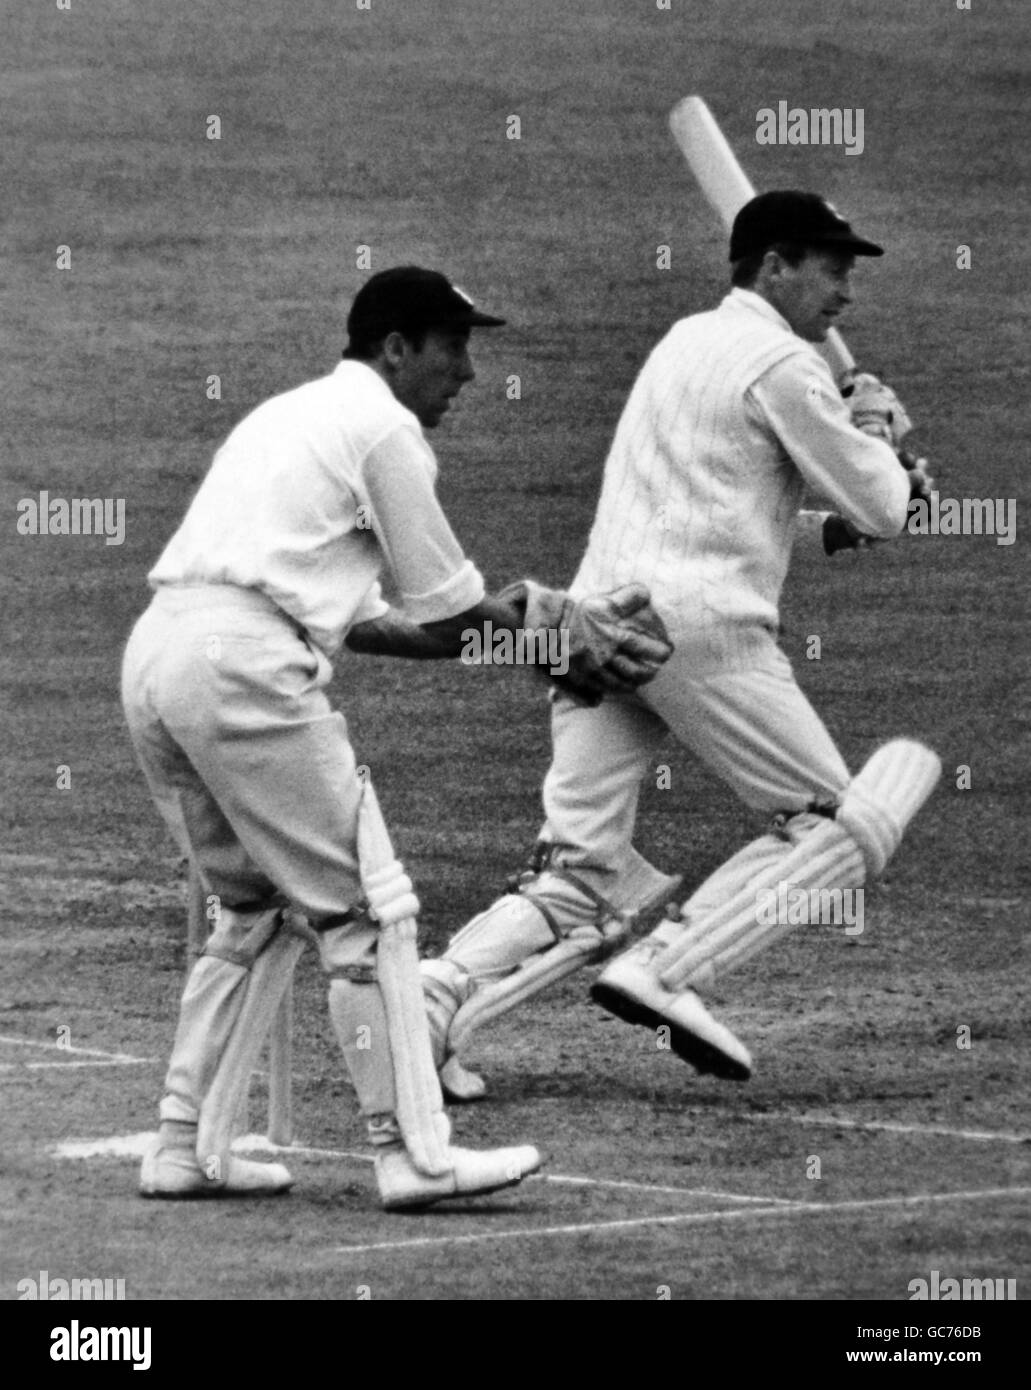 Cricket - County Championship 1968 - Middlesex V Essex - erster Tag - Lords Cricket Ground Stockfoto